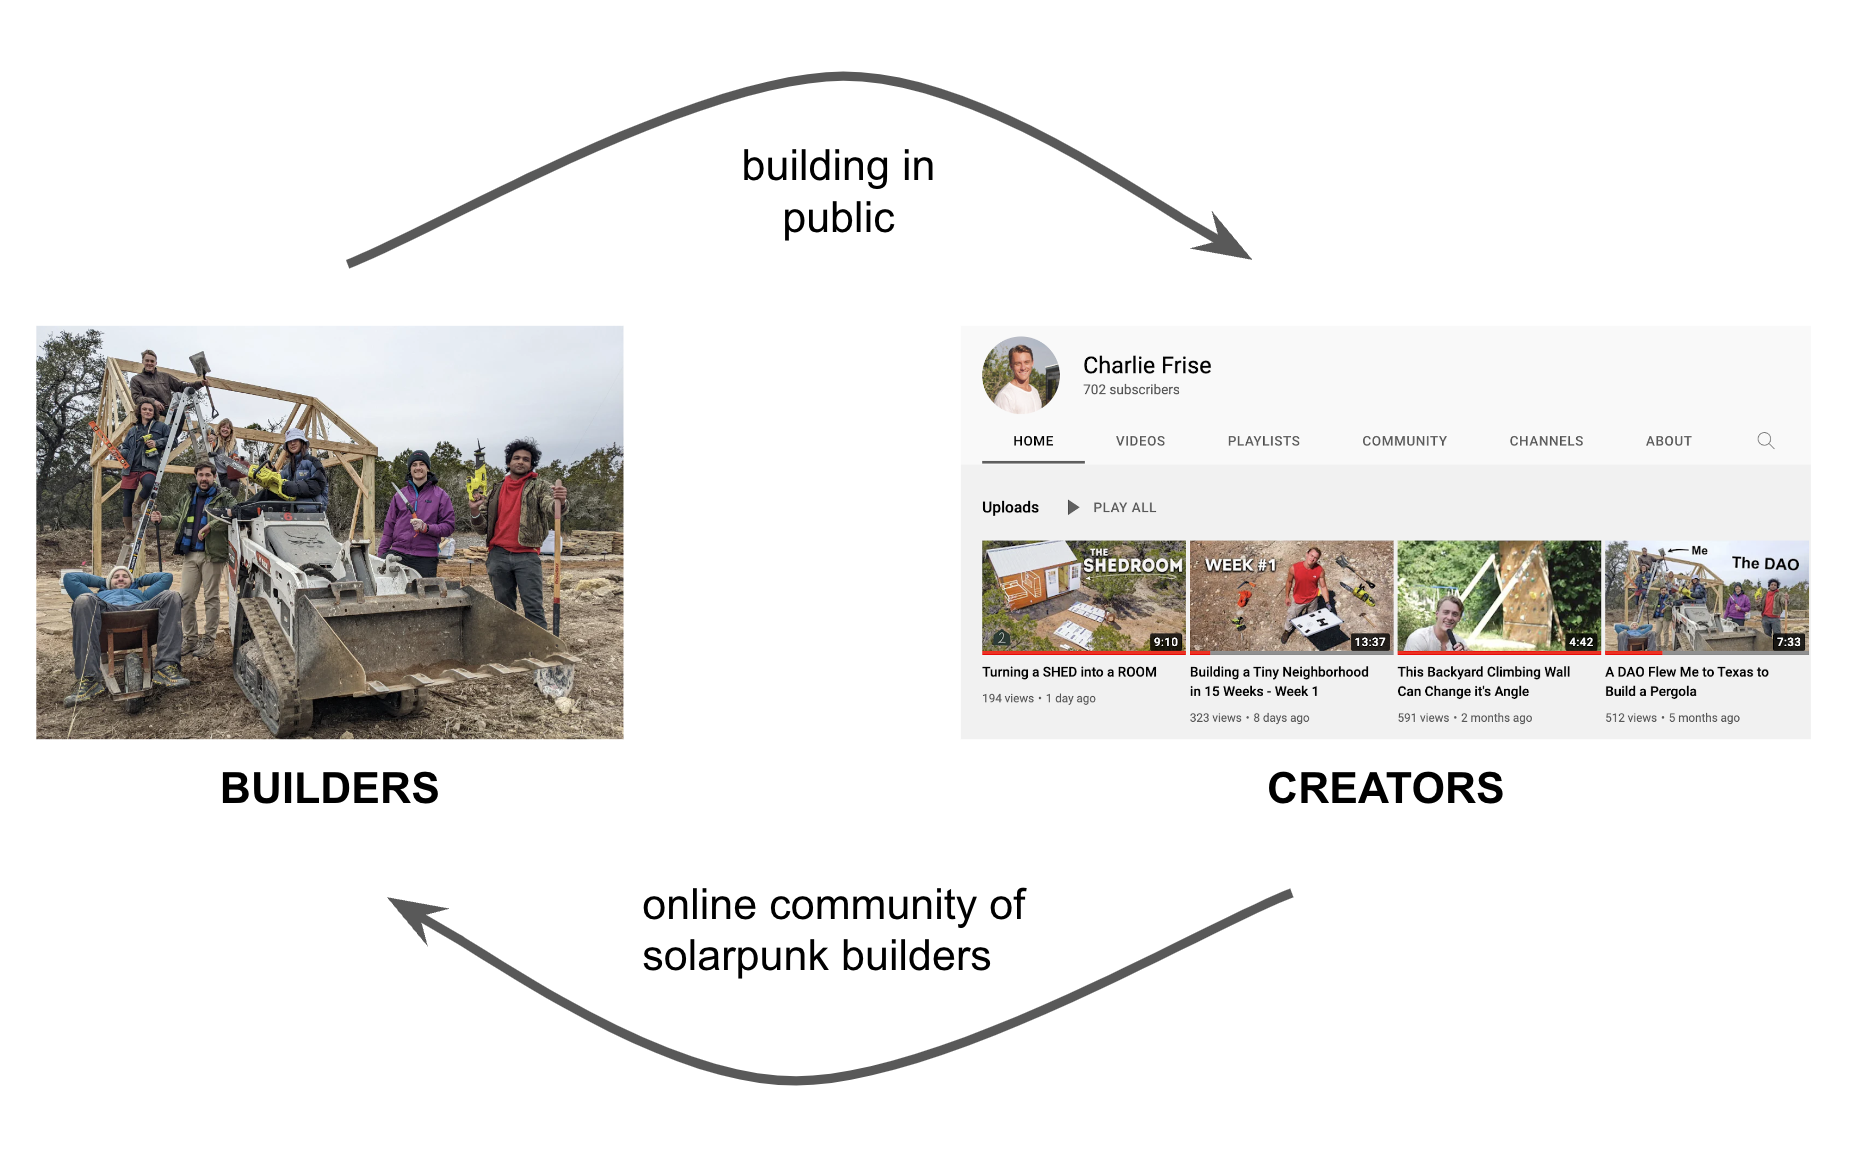 the builder-creator growth loop (or perhaps a form of import replacement, for the Jane Jacobs nerds out there)